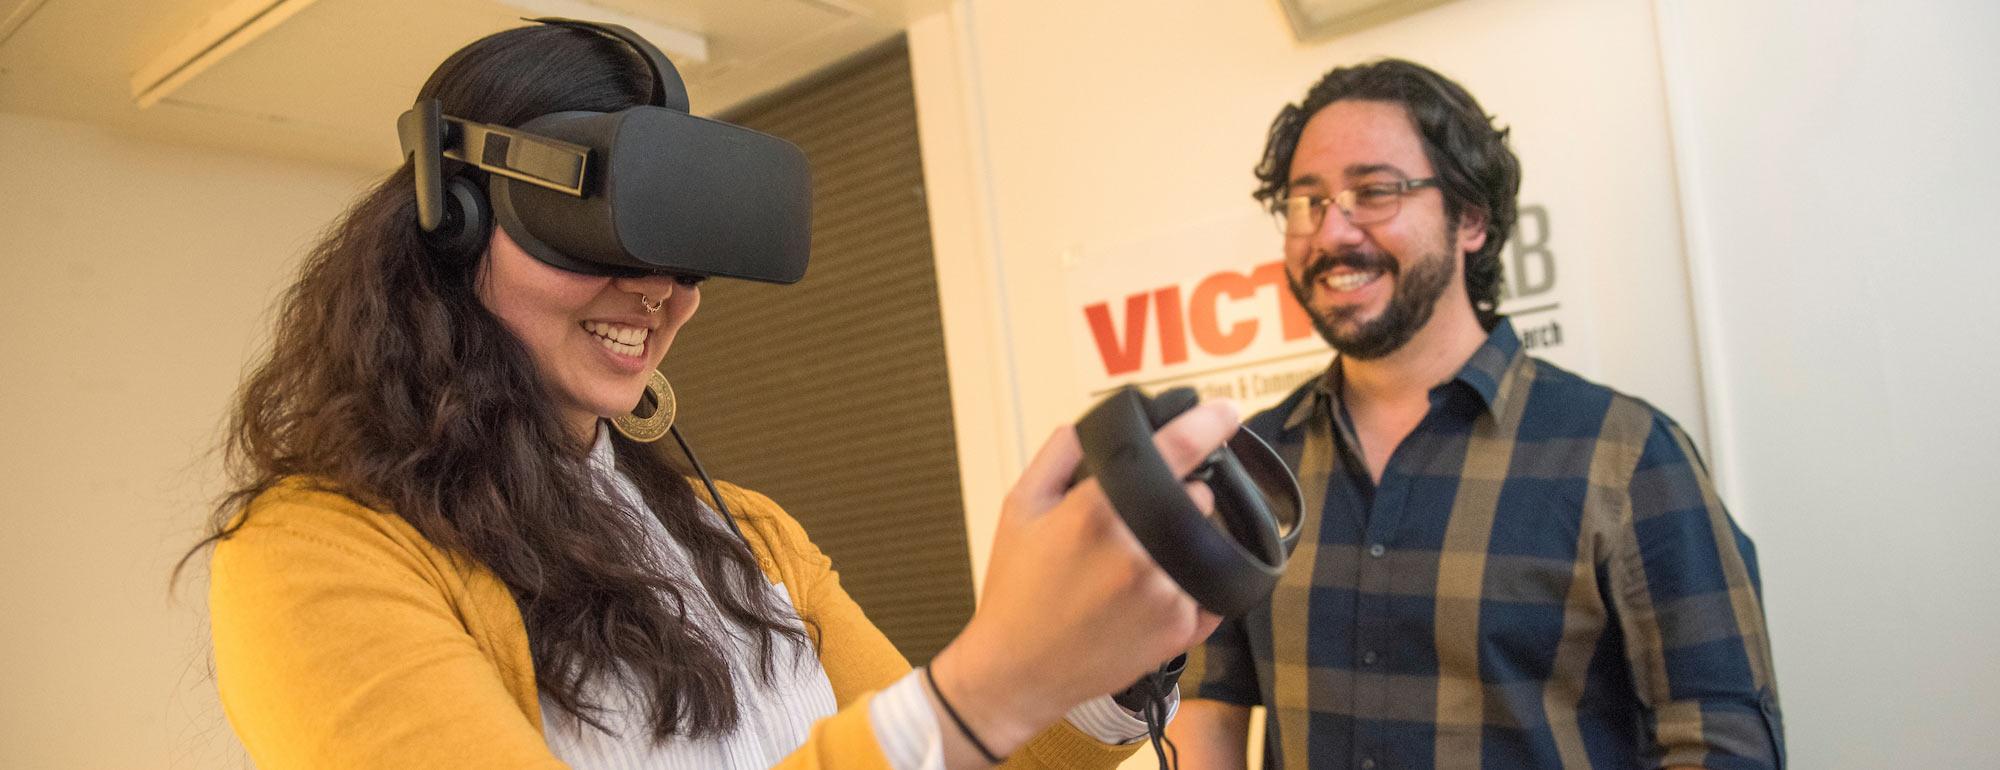 A student smiles while using a virtual reality set up.